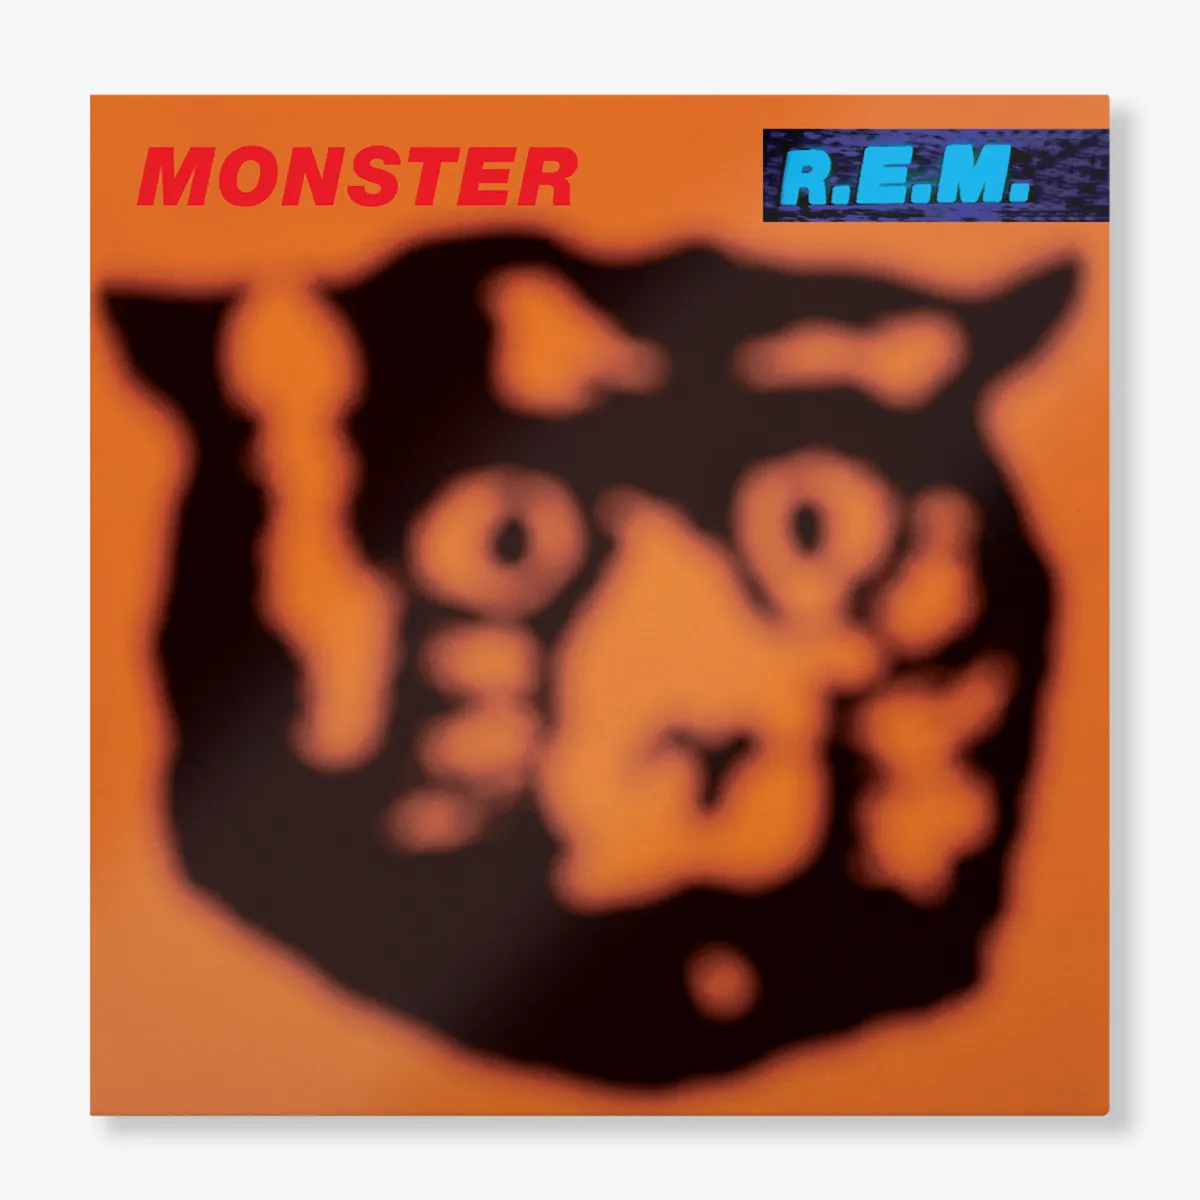 <strong>R.E.M. - Monster (25th Anniversary Edition)</strong> (Vinyl LP - black)